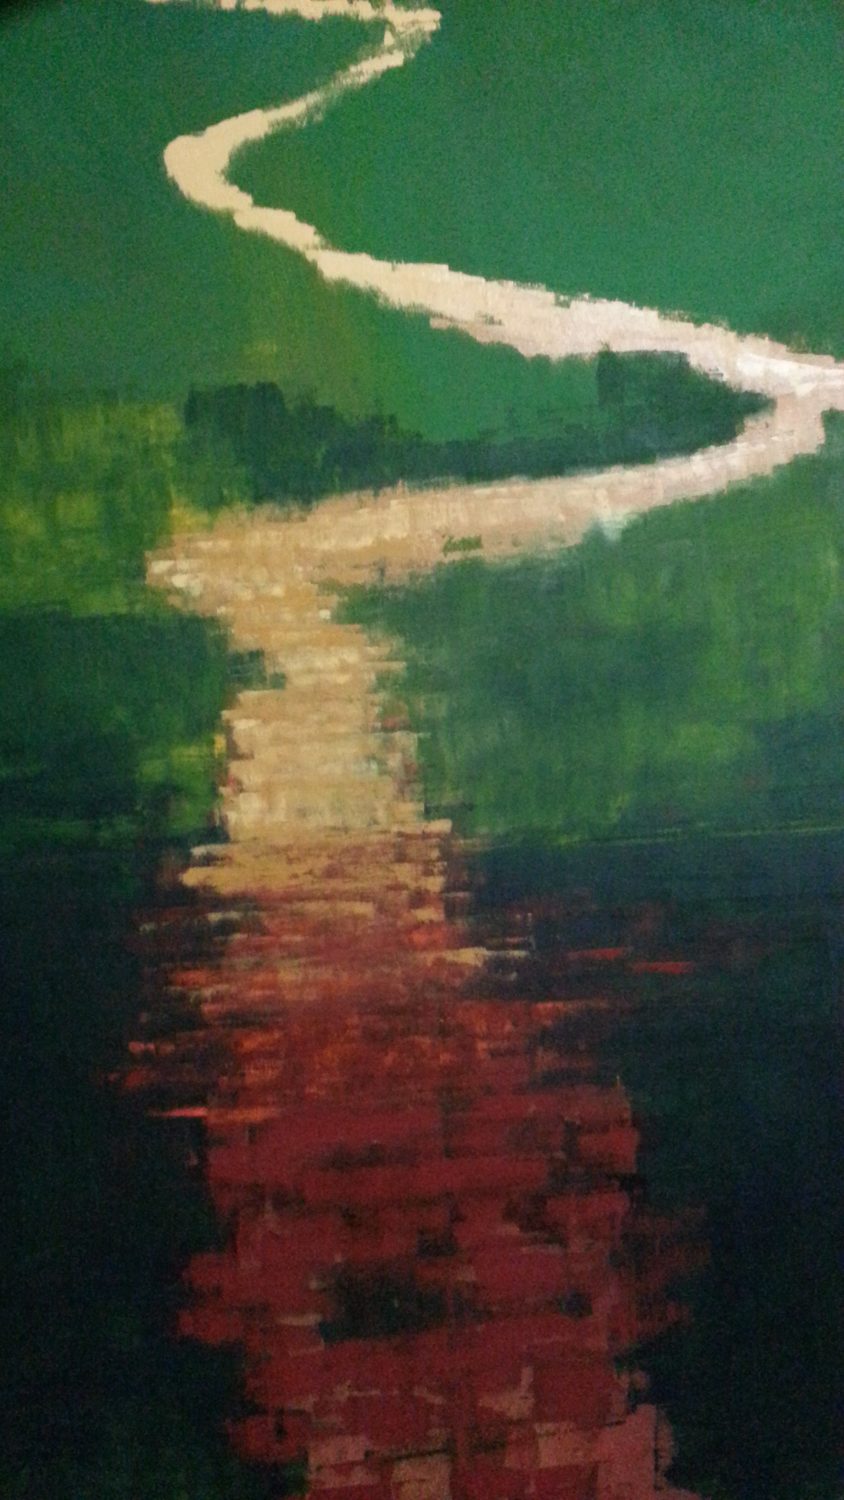 thumbnail of Rumbo al Lago by JerÃ³nimo LÃ³pez. medium: oil on canvas. date: unknown. dimensions: 31.5 x 23.62 inches